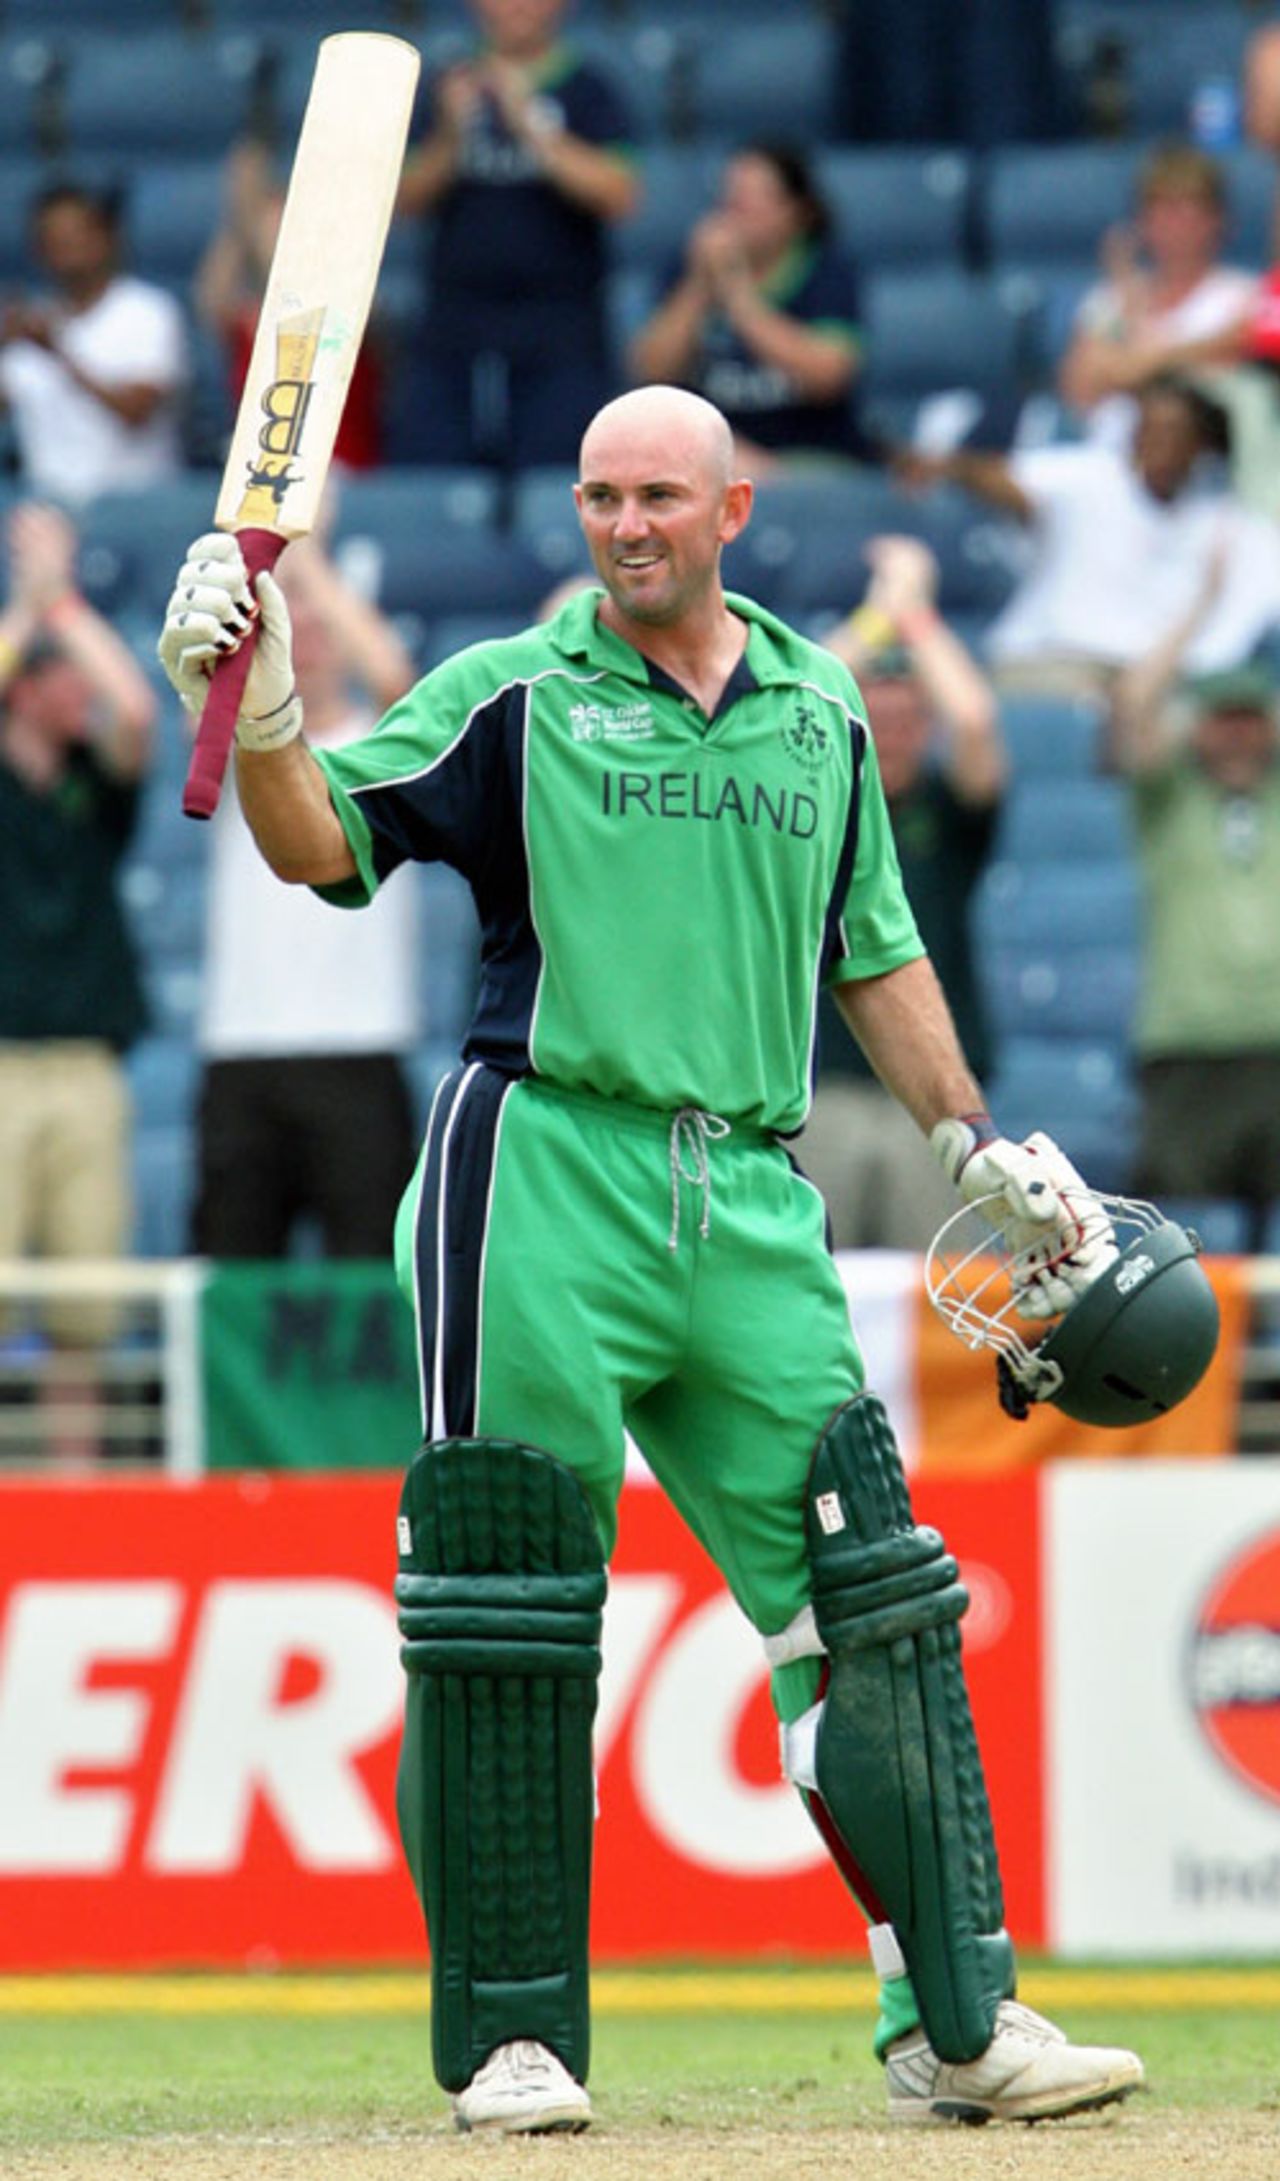 Jeremy Bray celebrates his hundred, Ireland's first in the World Cup, Ireland v Zimbabwe, Group D, Jamaica, March 15, 2007